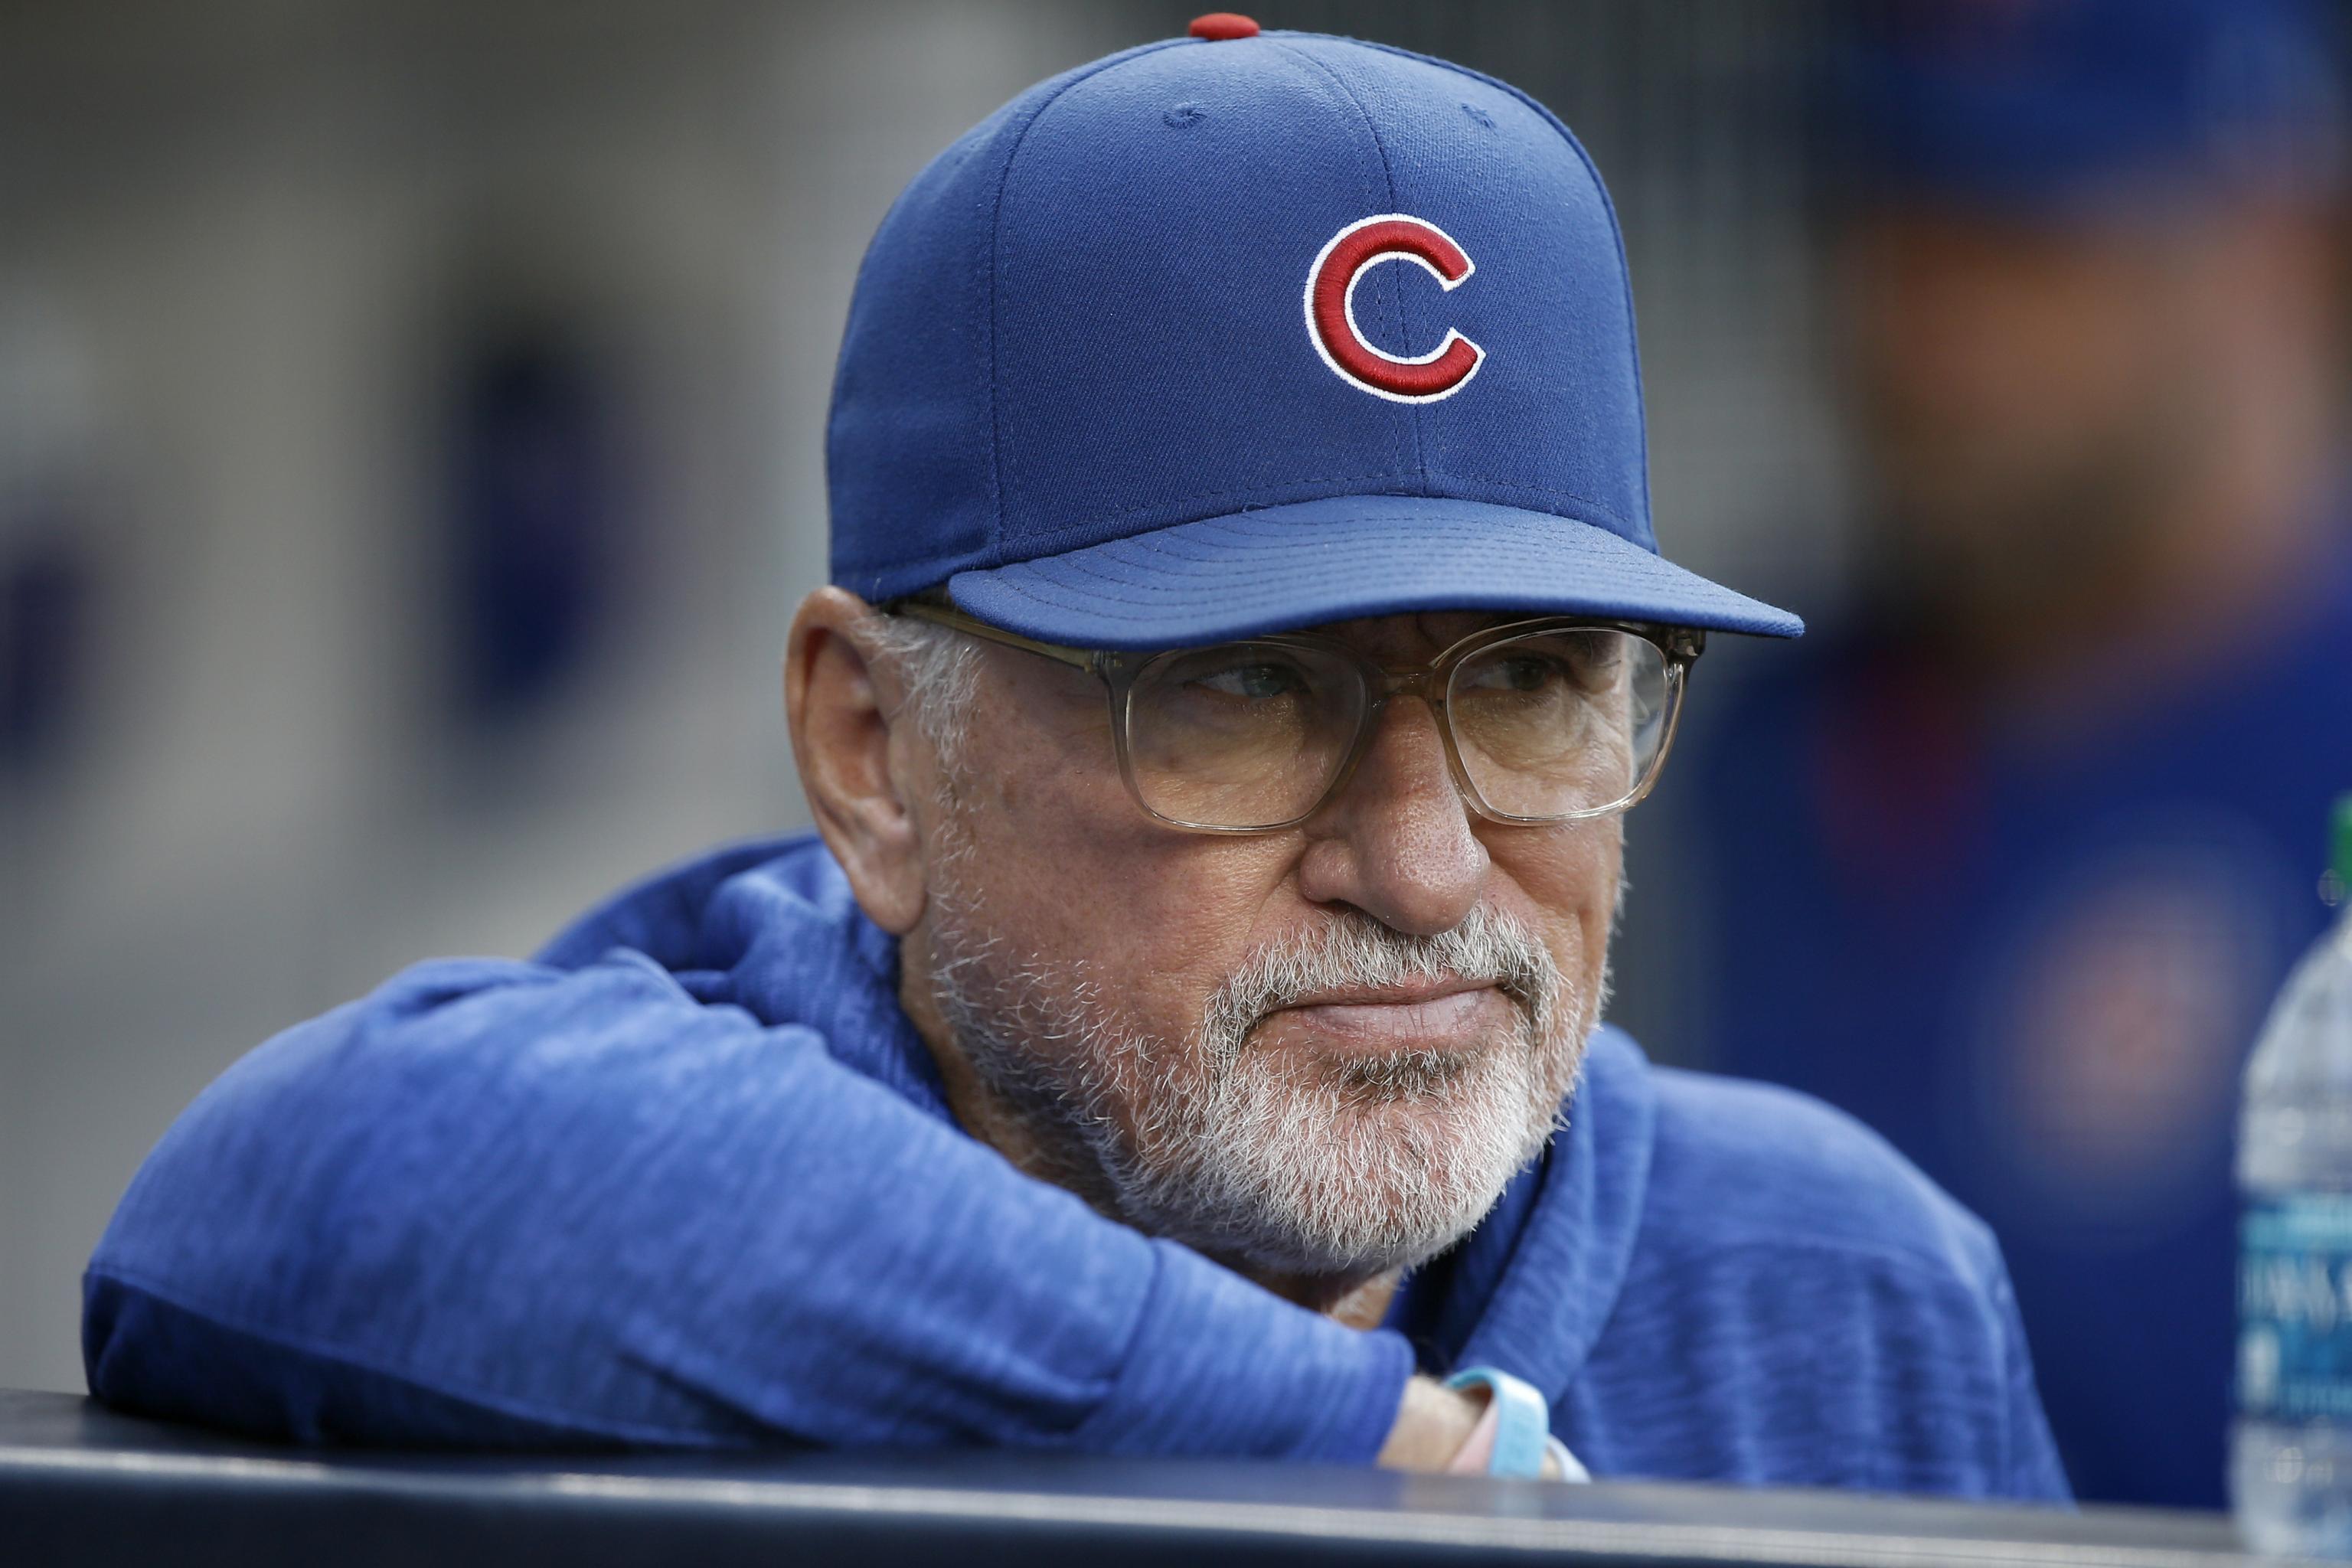 Cubs rise to Joe Maddon's defense over controversial World Series decisions